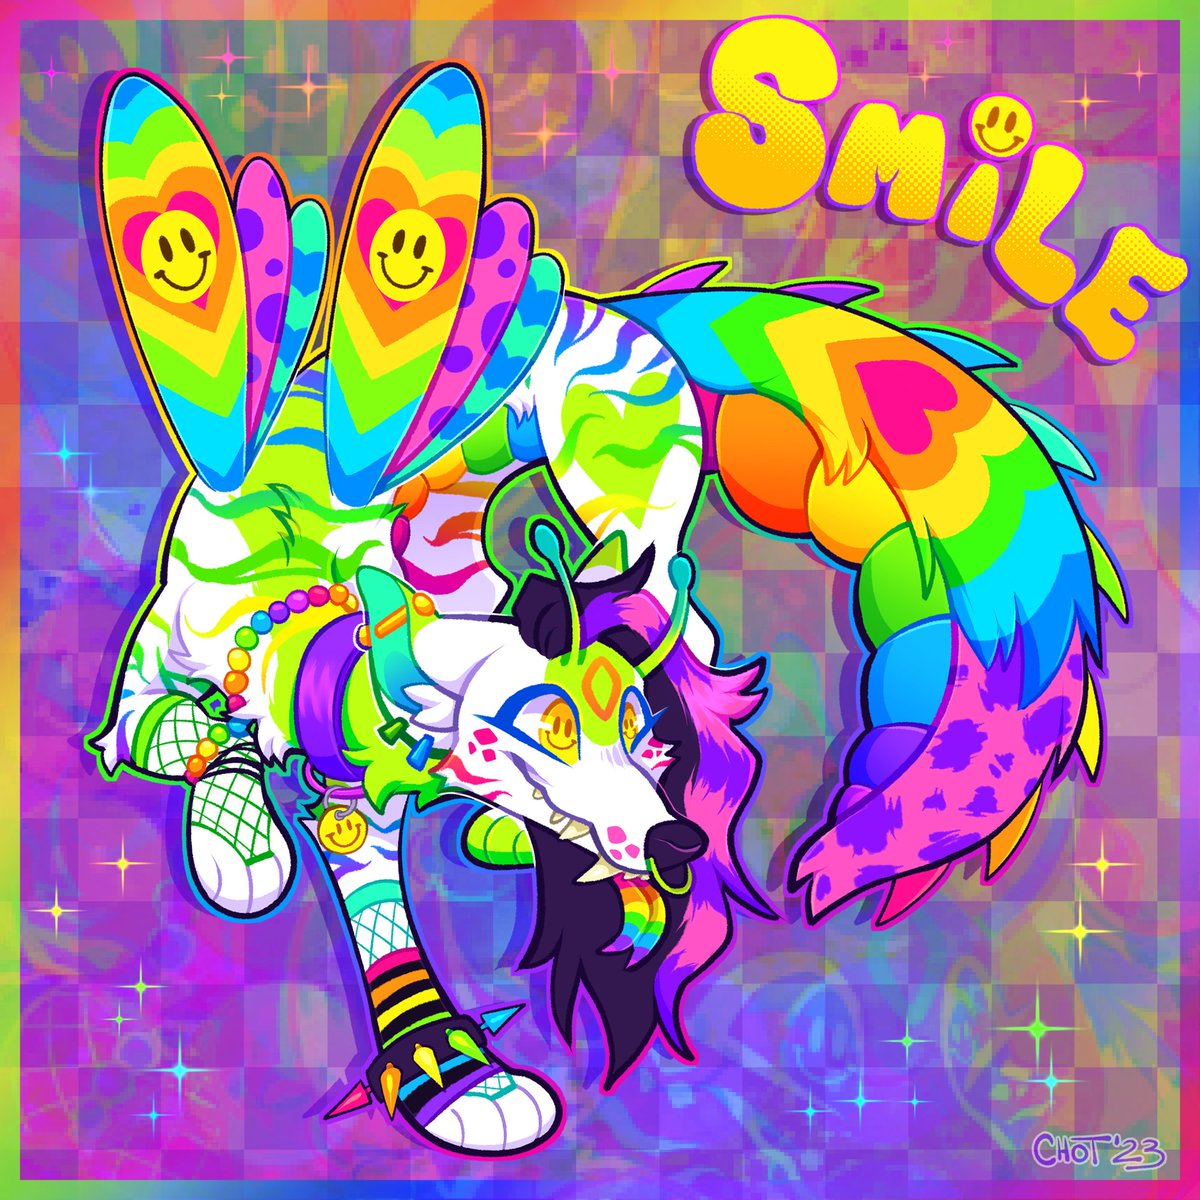 Say hello to Dizzy!! 
🌈💖🙂
She's a wolf/praying mantis hybrid sparkledog!
She loves to make friends and her special interest is smiley faces!